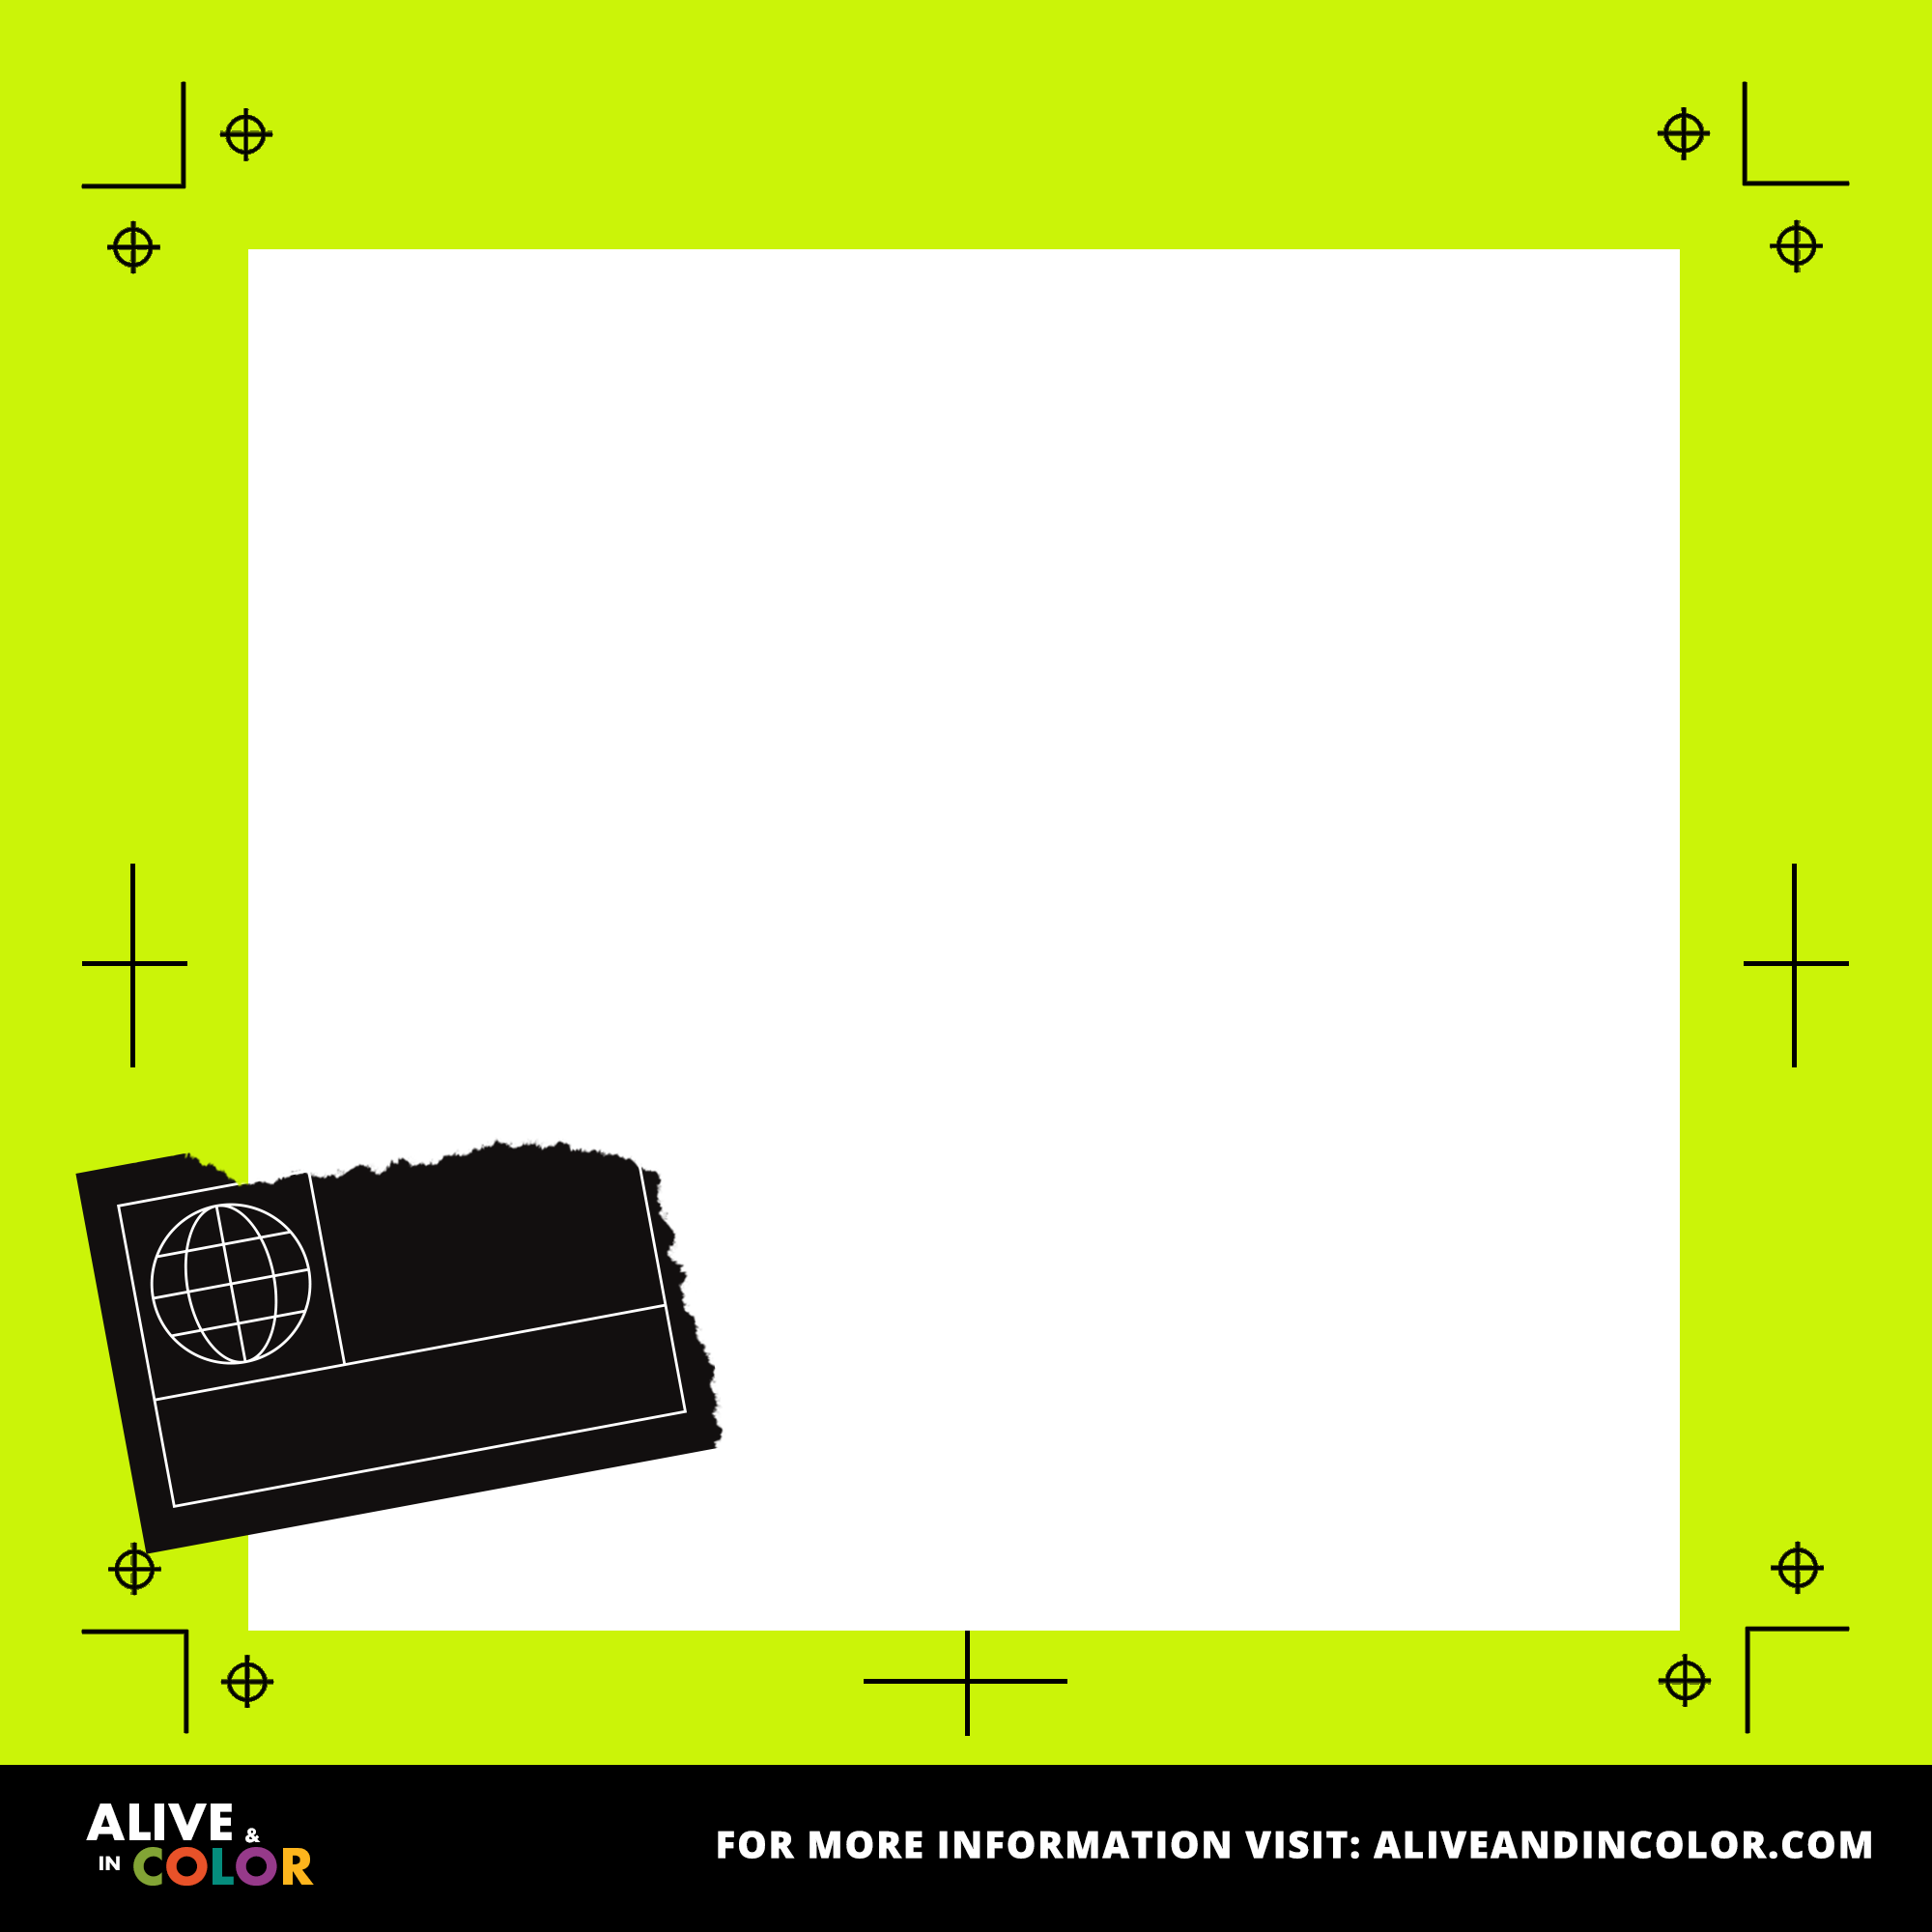 social media background template with green-yellow border